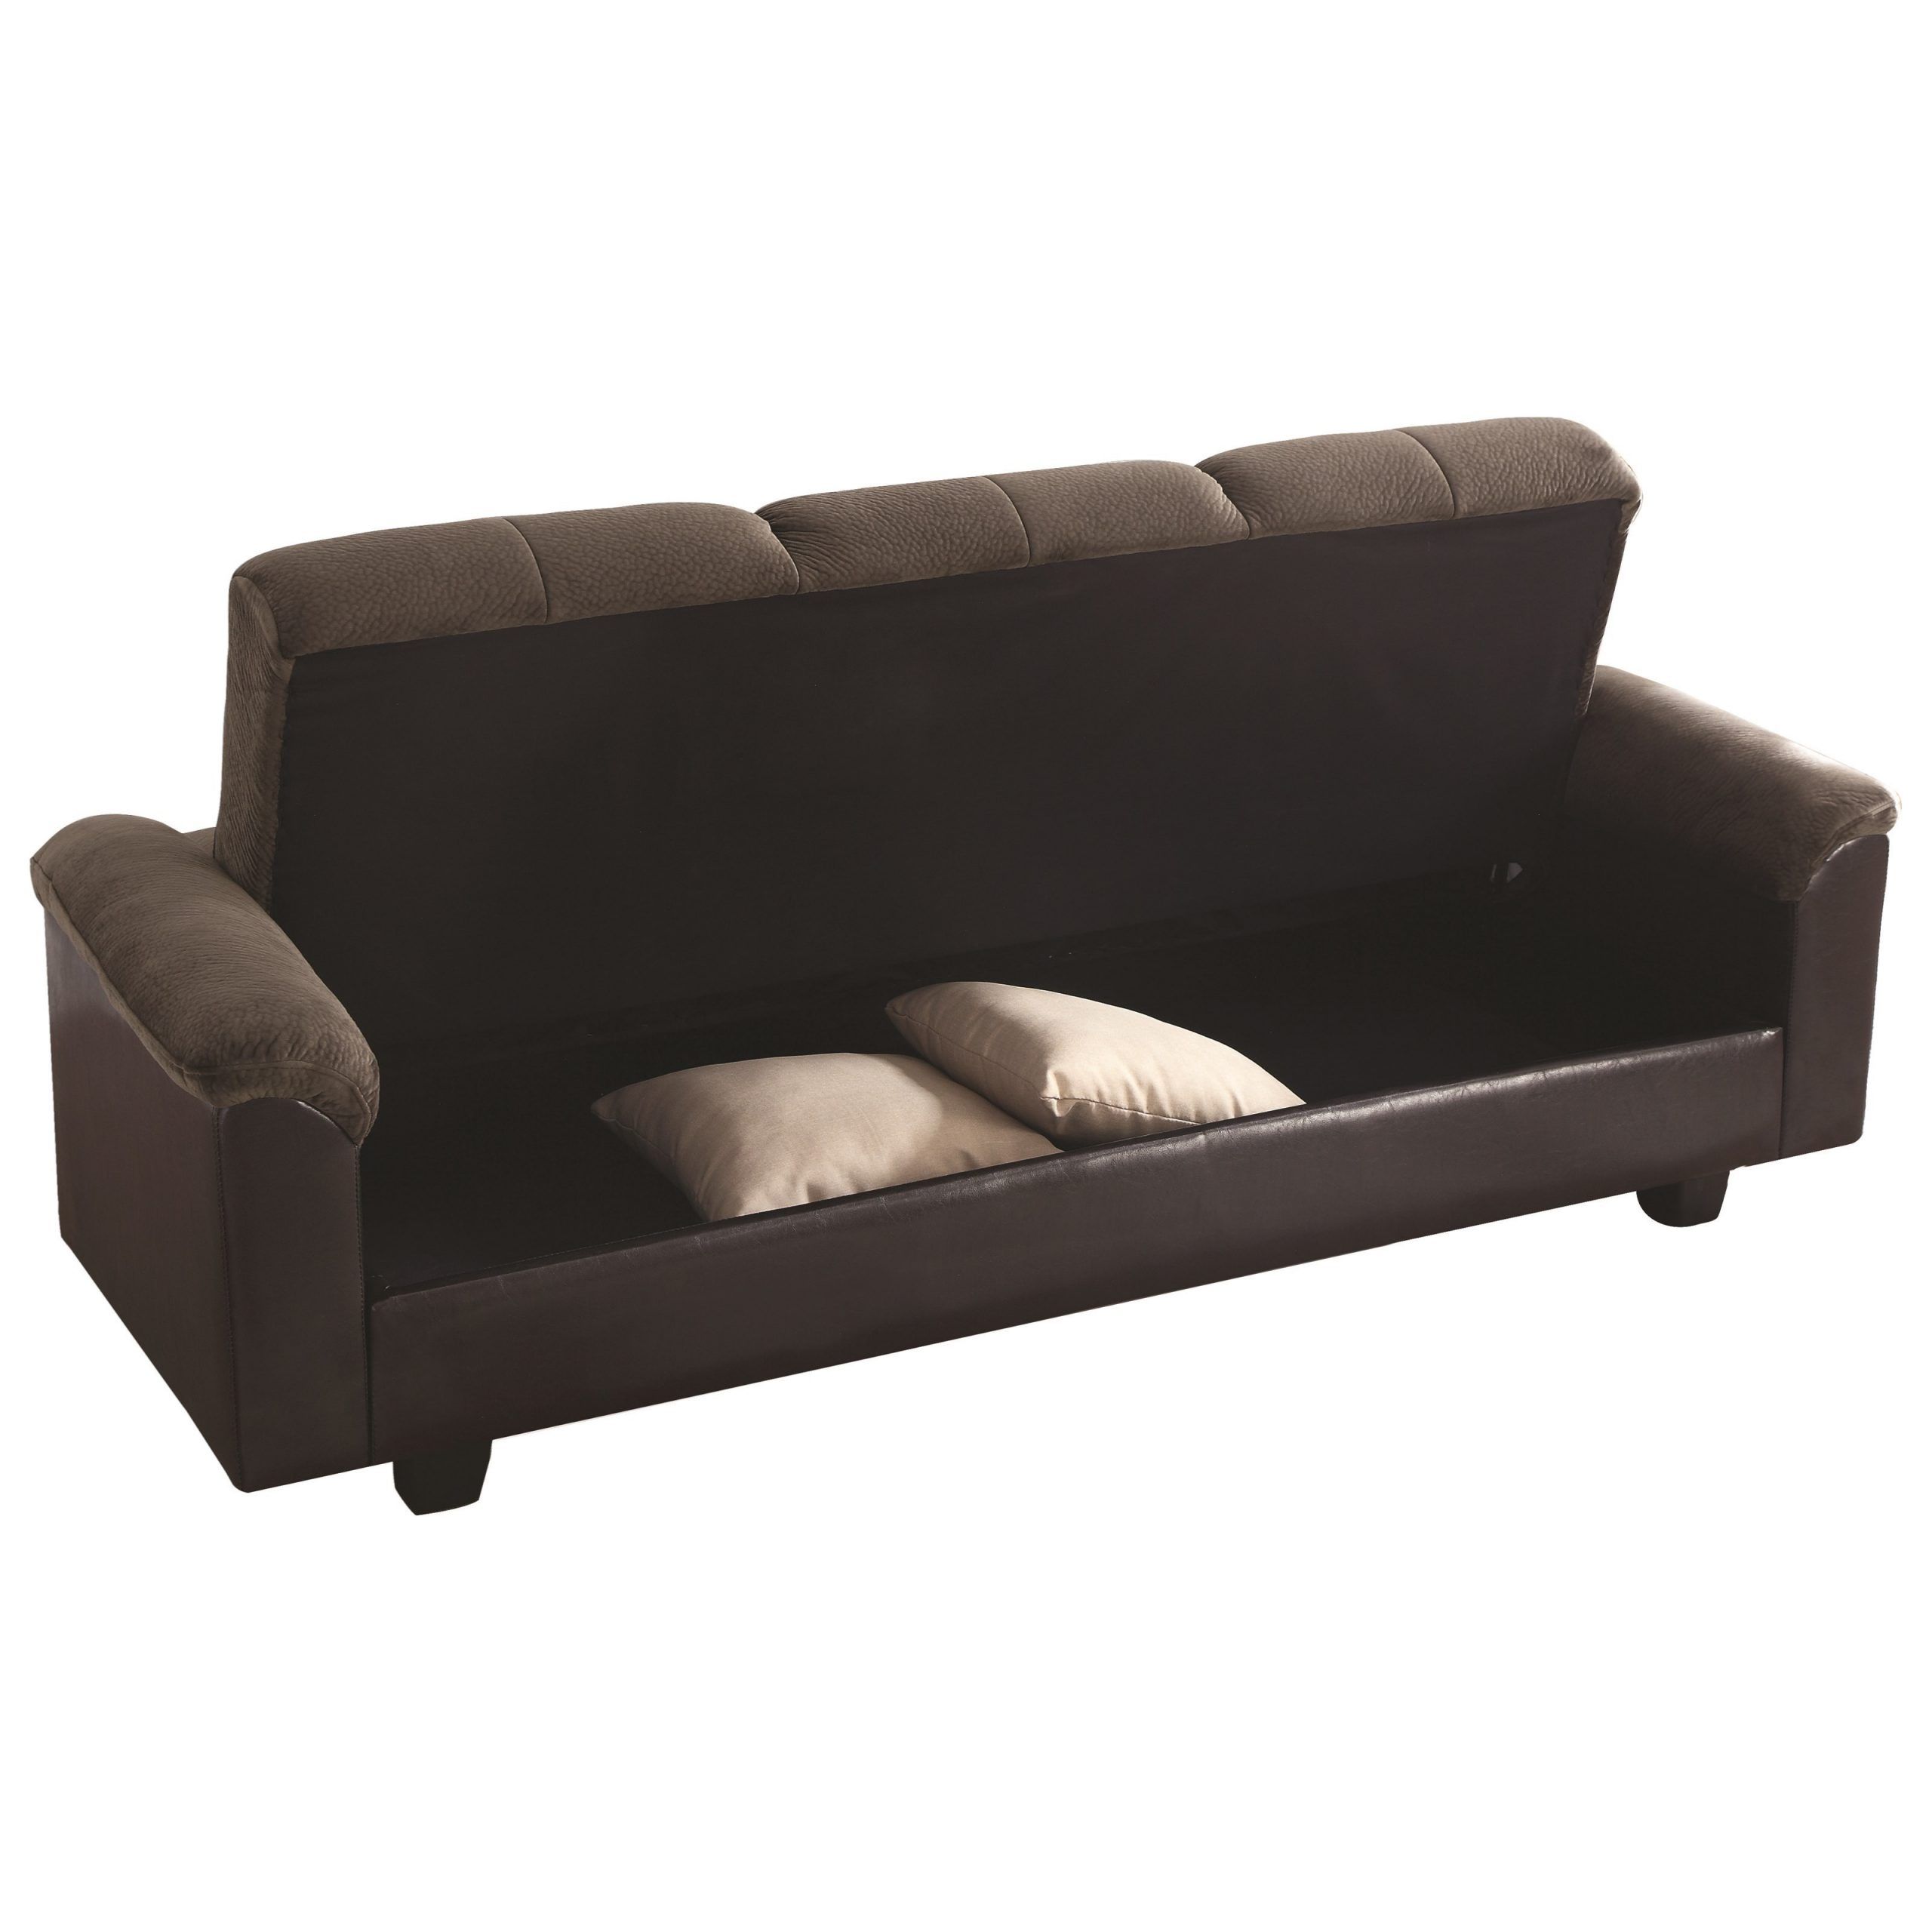 Trendy Liberty Sectional Futon Sofas With Storage Pertaining To Sofa Beds And Futons Two Tone Sofa Bed With Storage (View 19 of 20)